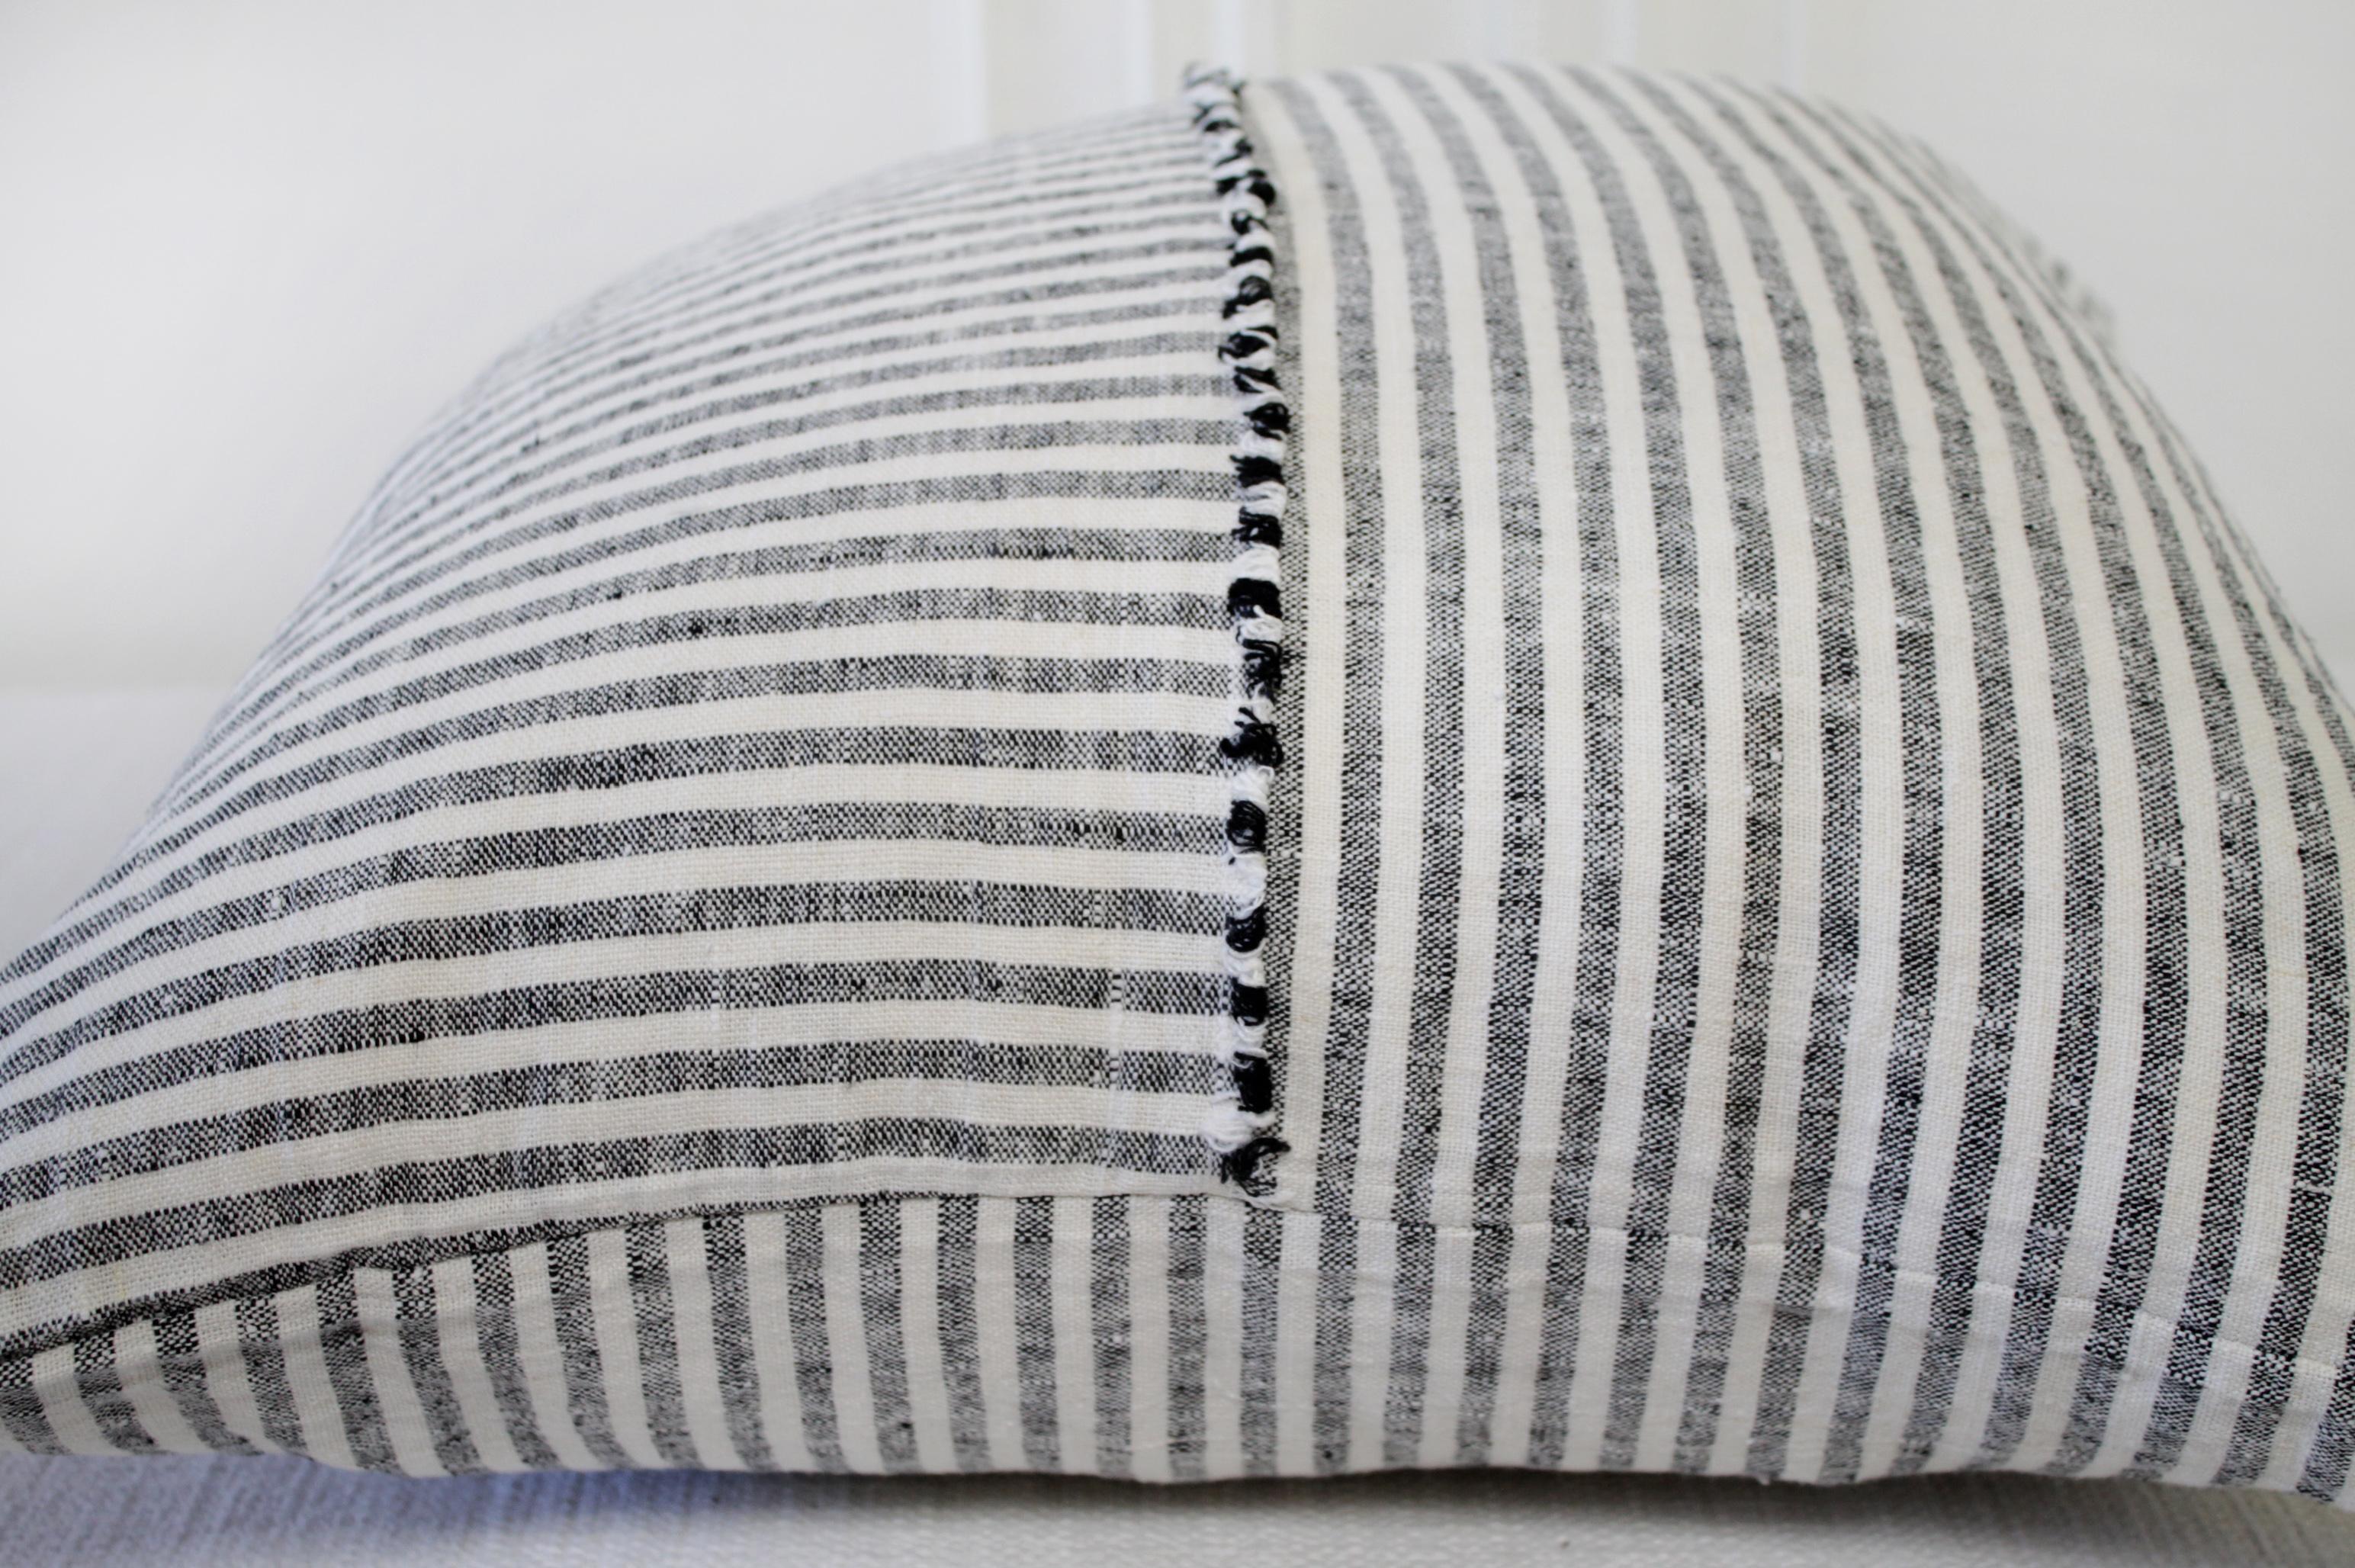 Contemporary Organic Linen Accent Pillows in Black and White Ticking Stripe For Sale